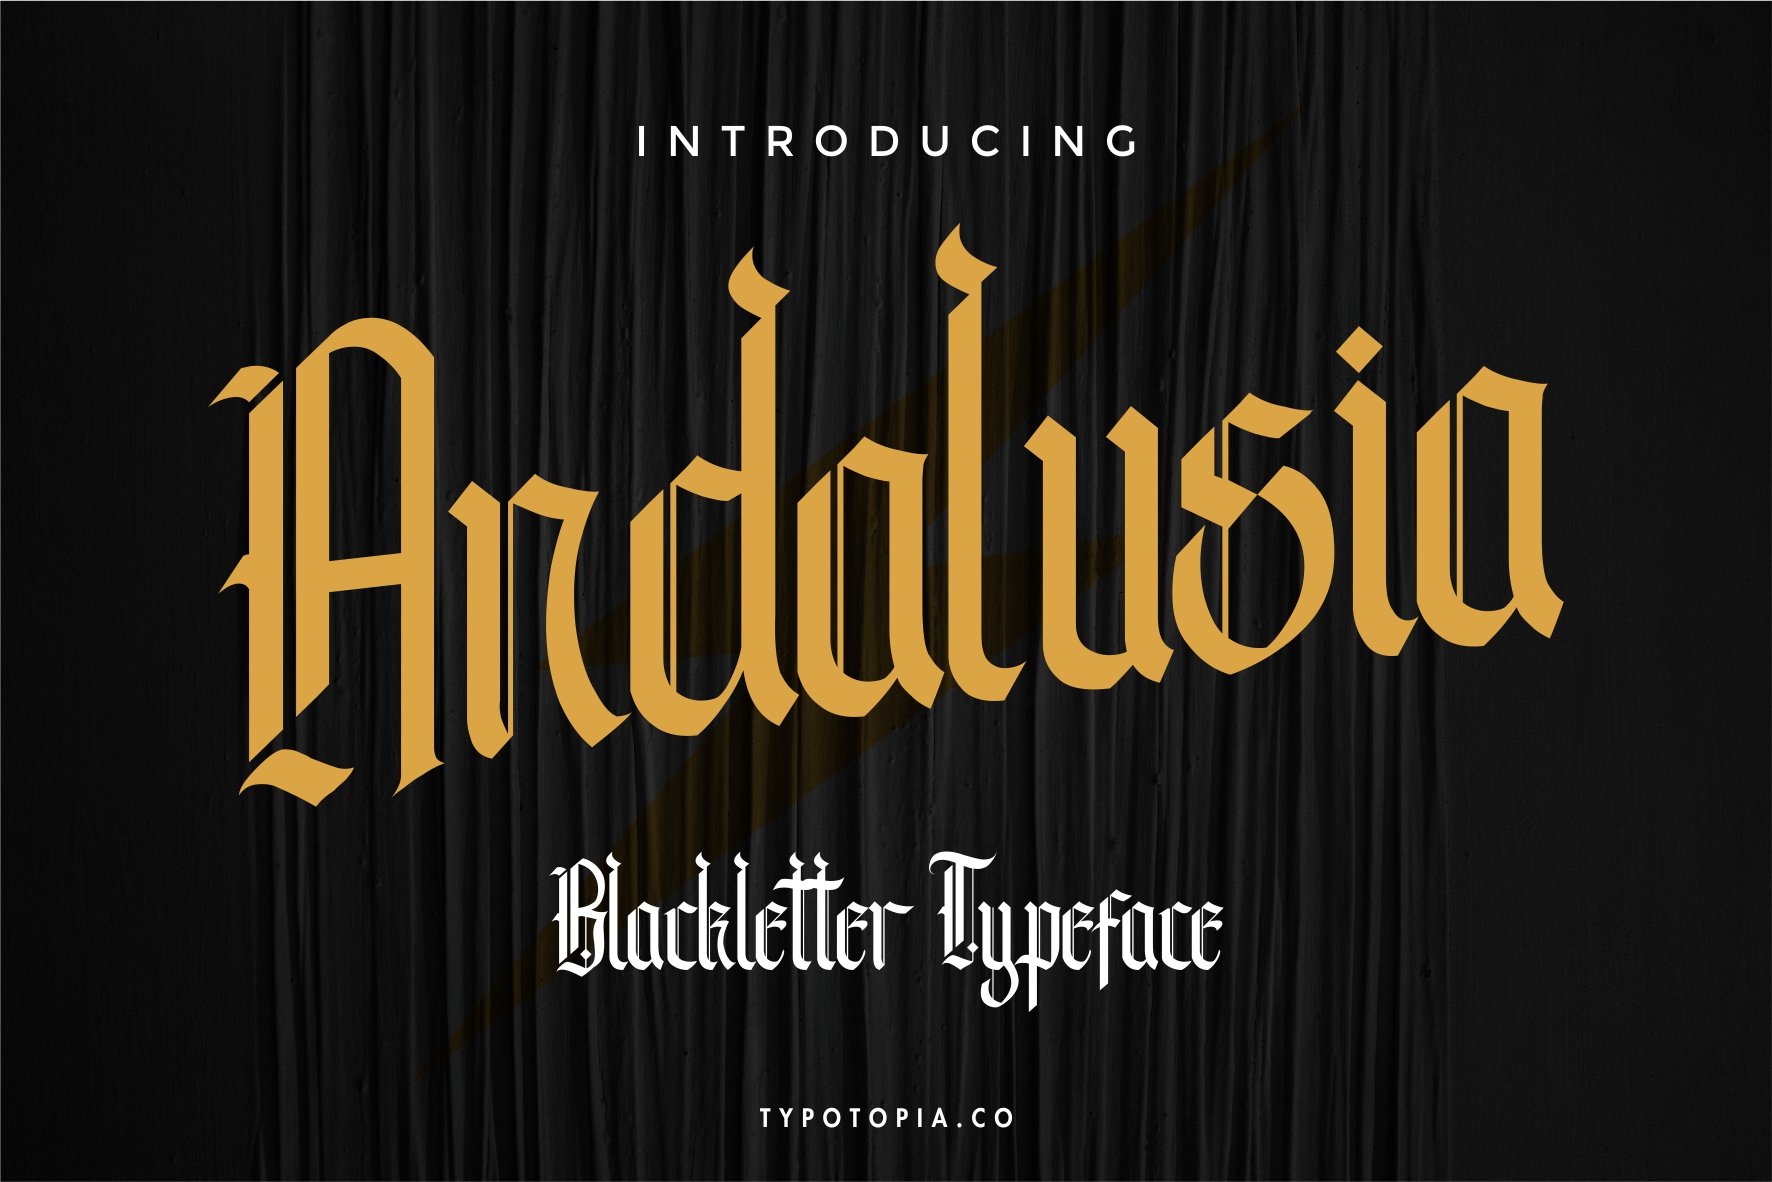 Andalusia - The Blackletter Typeface cover image.